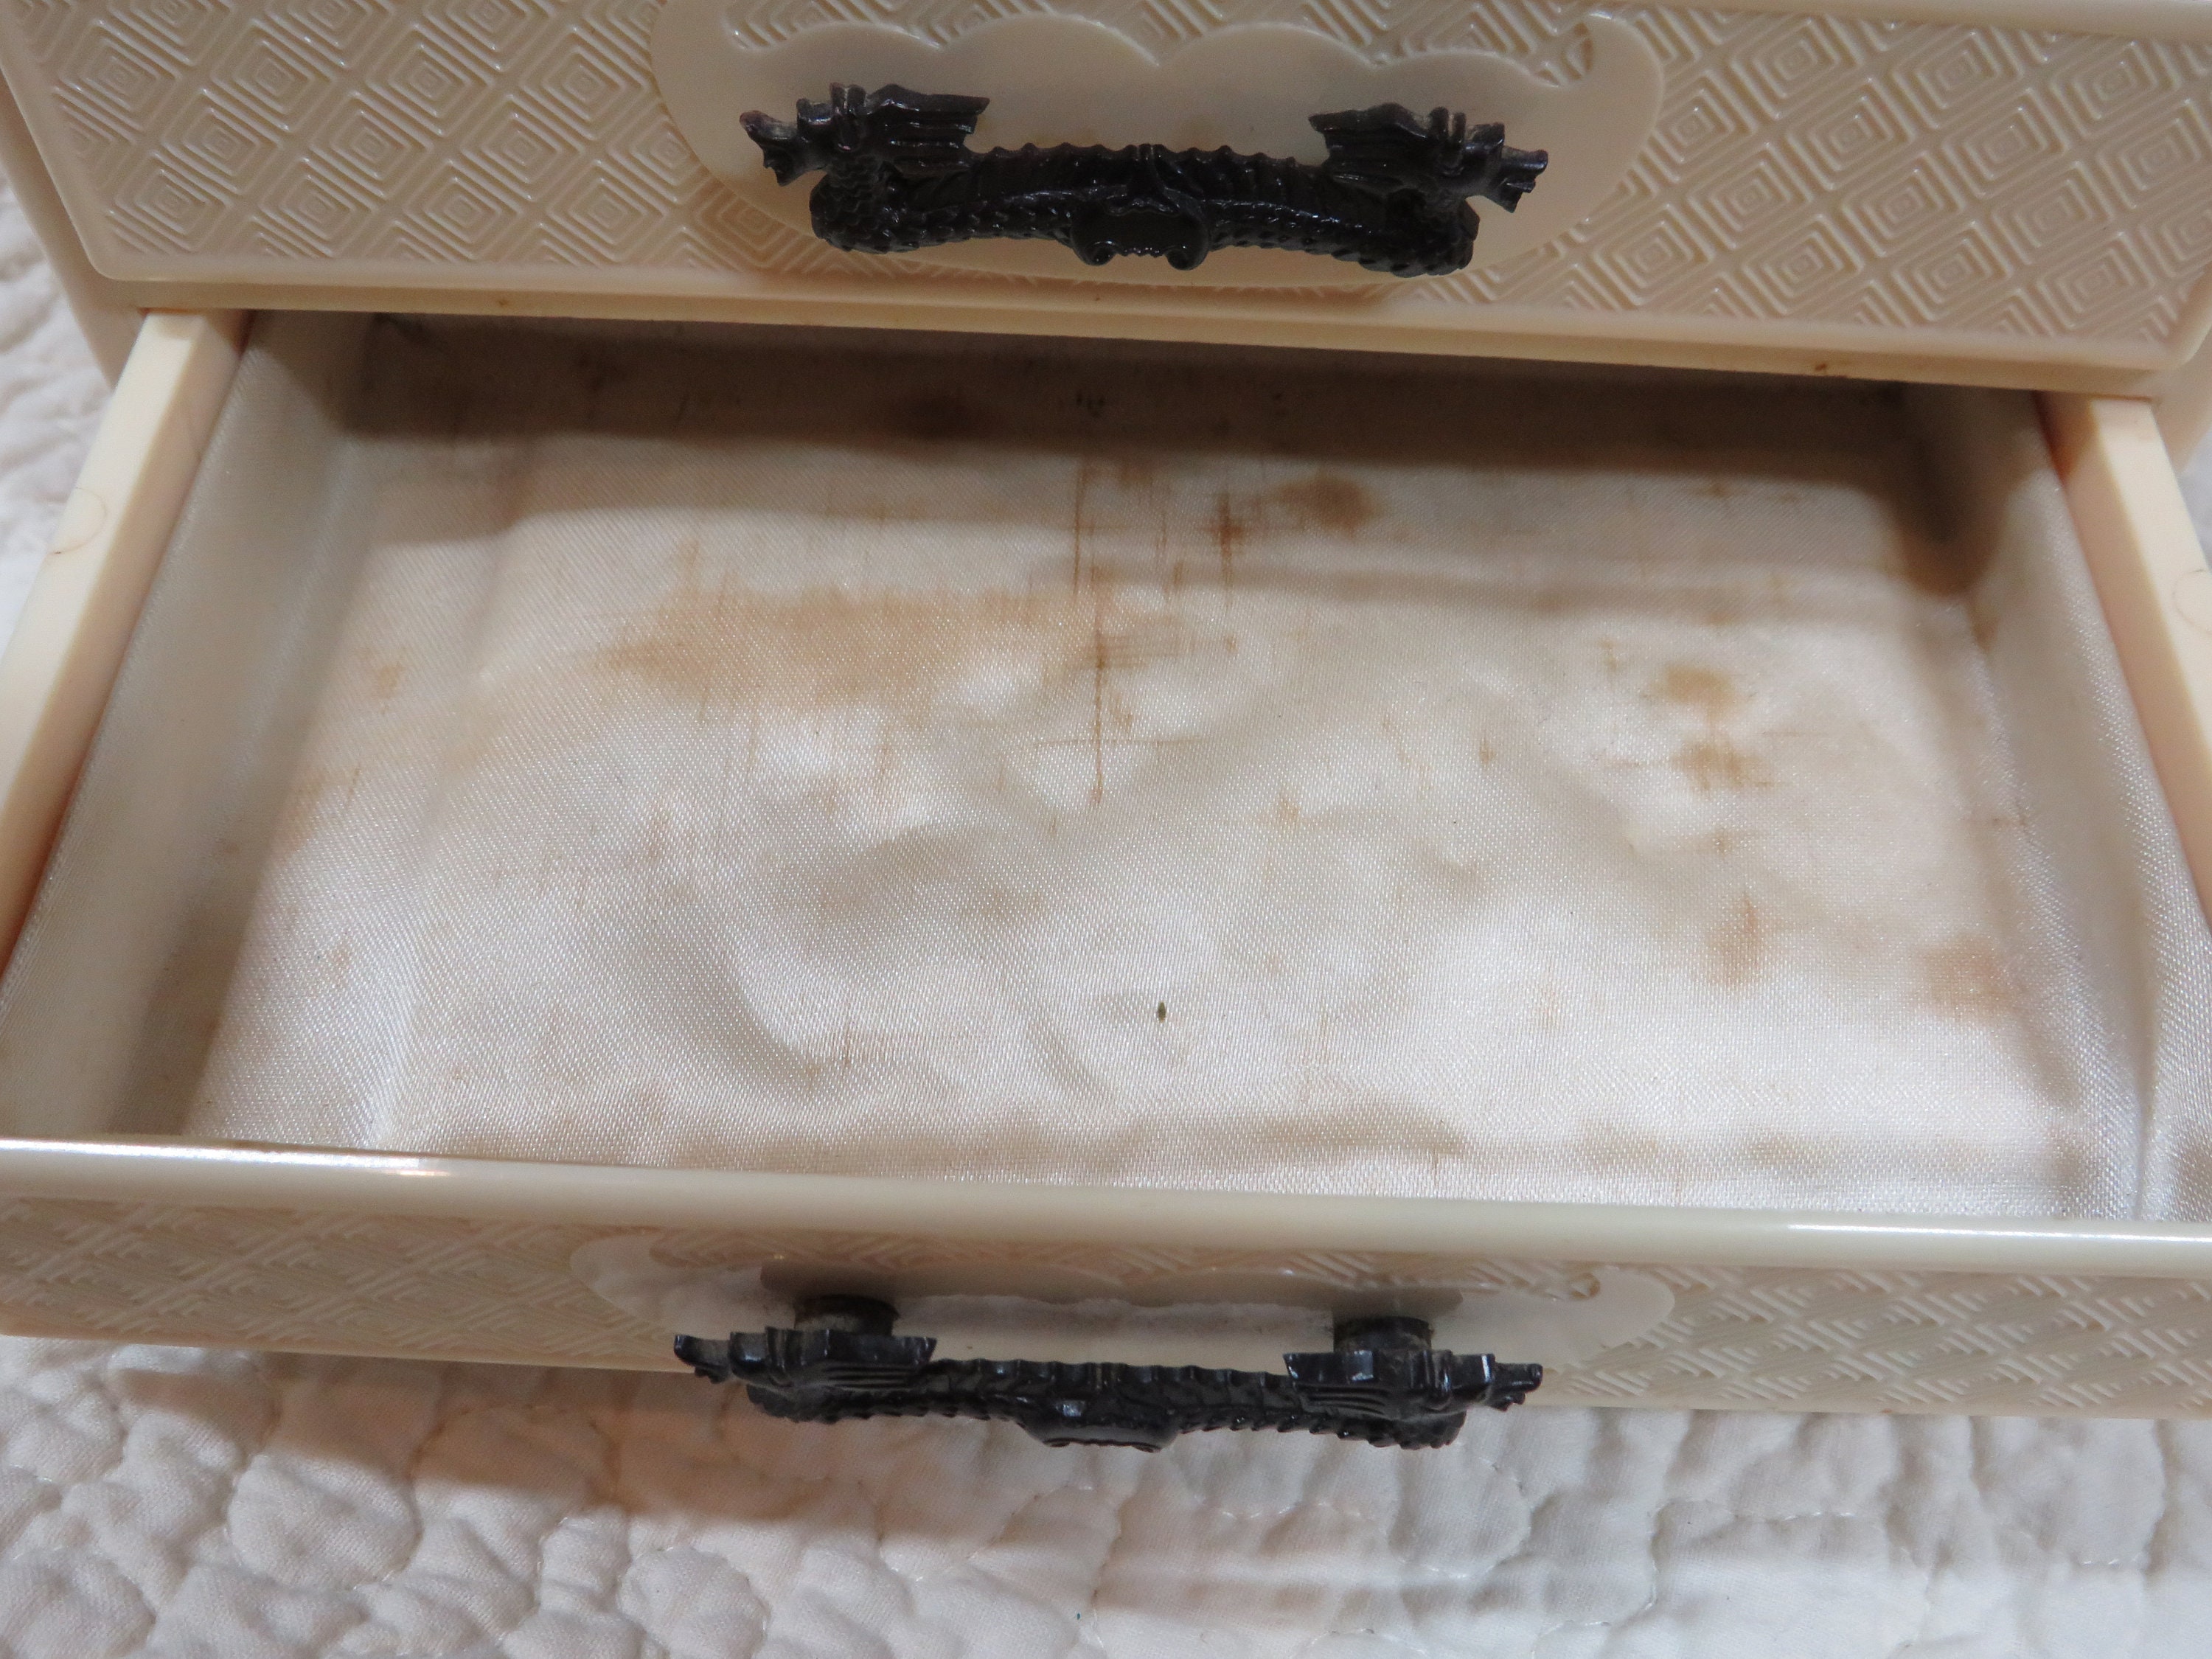 jewelry box musical wooden #jewelry, #jewelry cleaner solution for